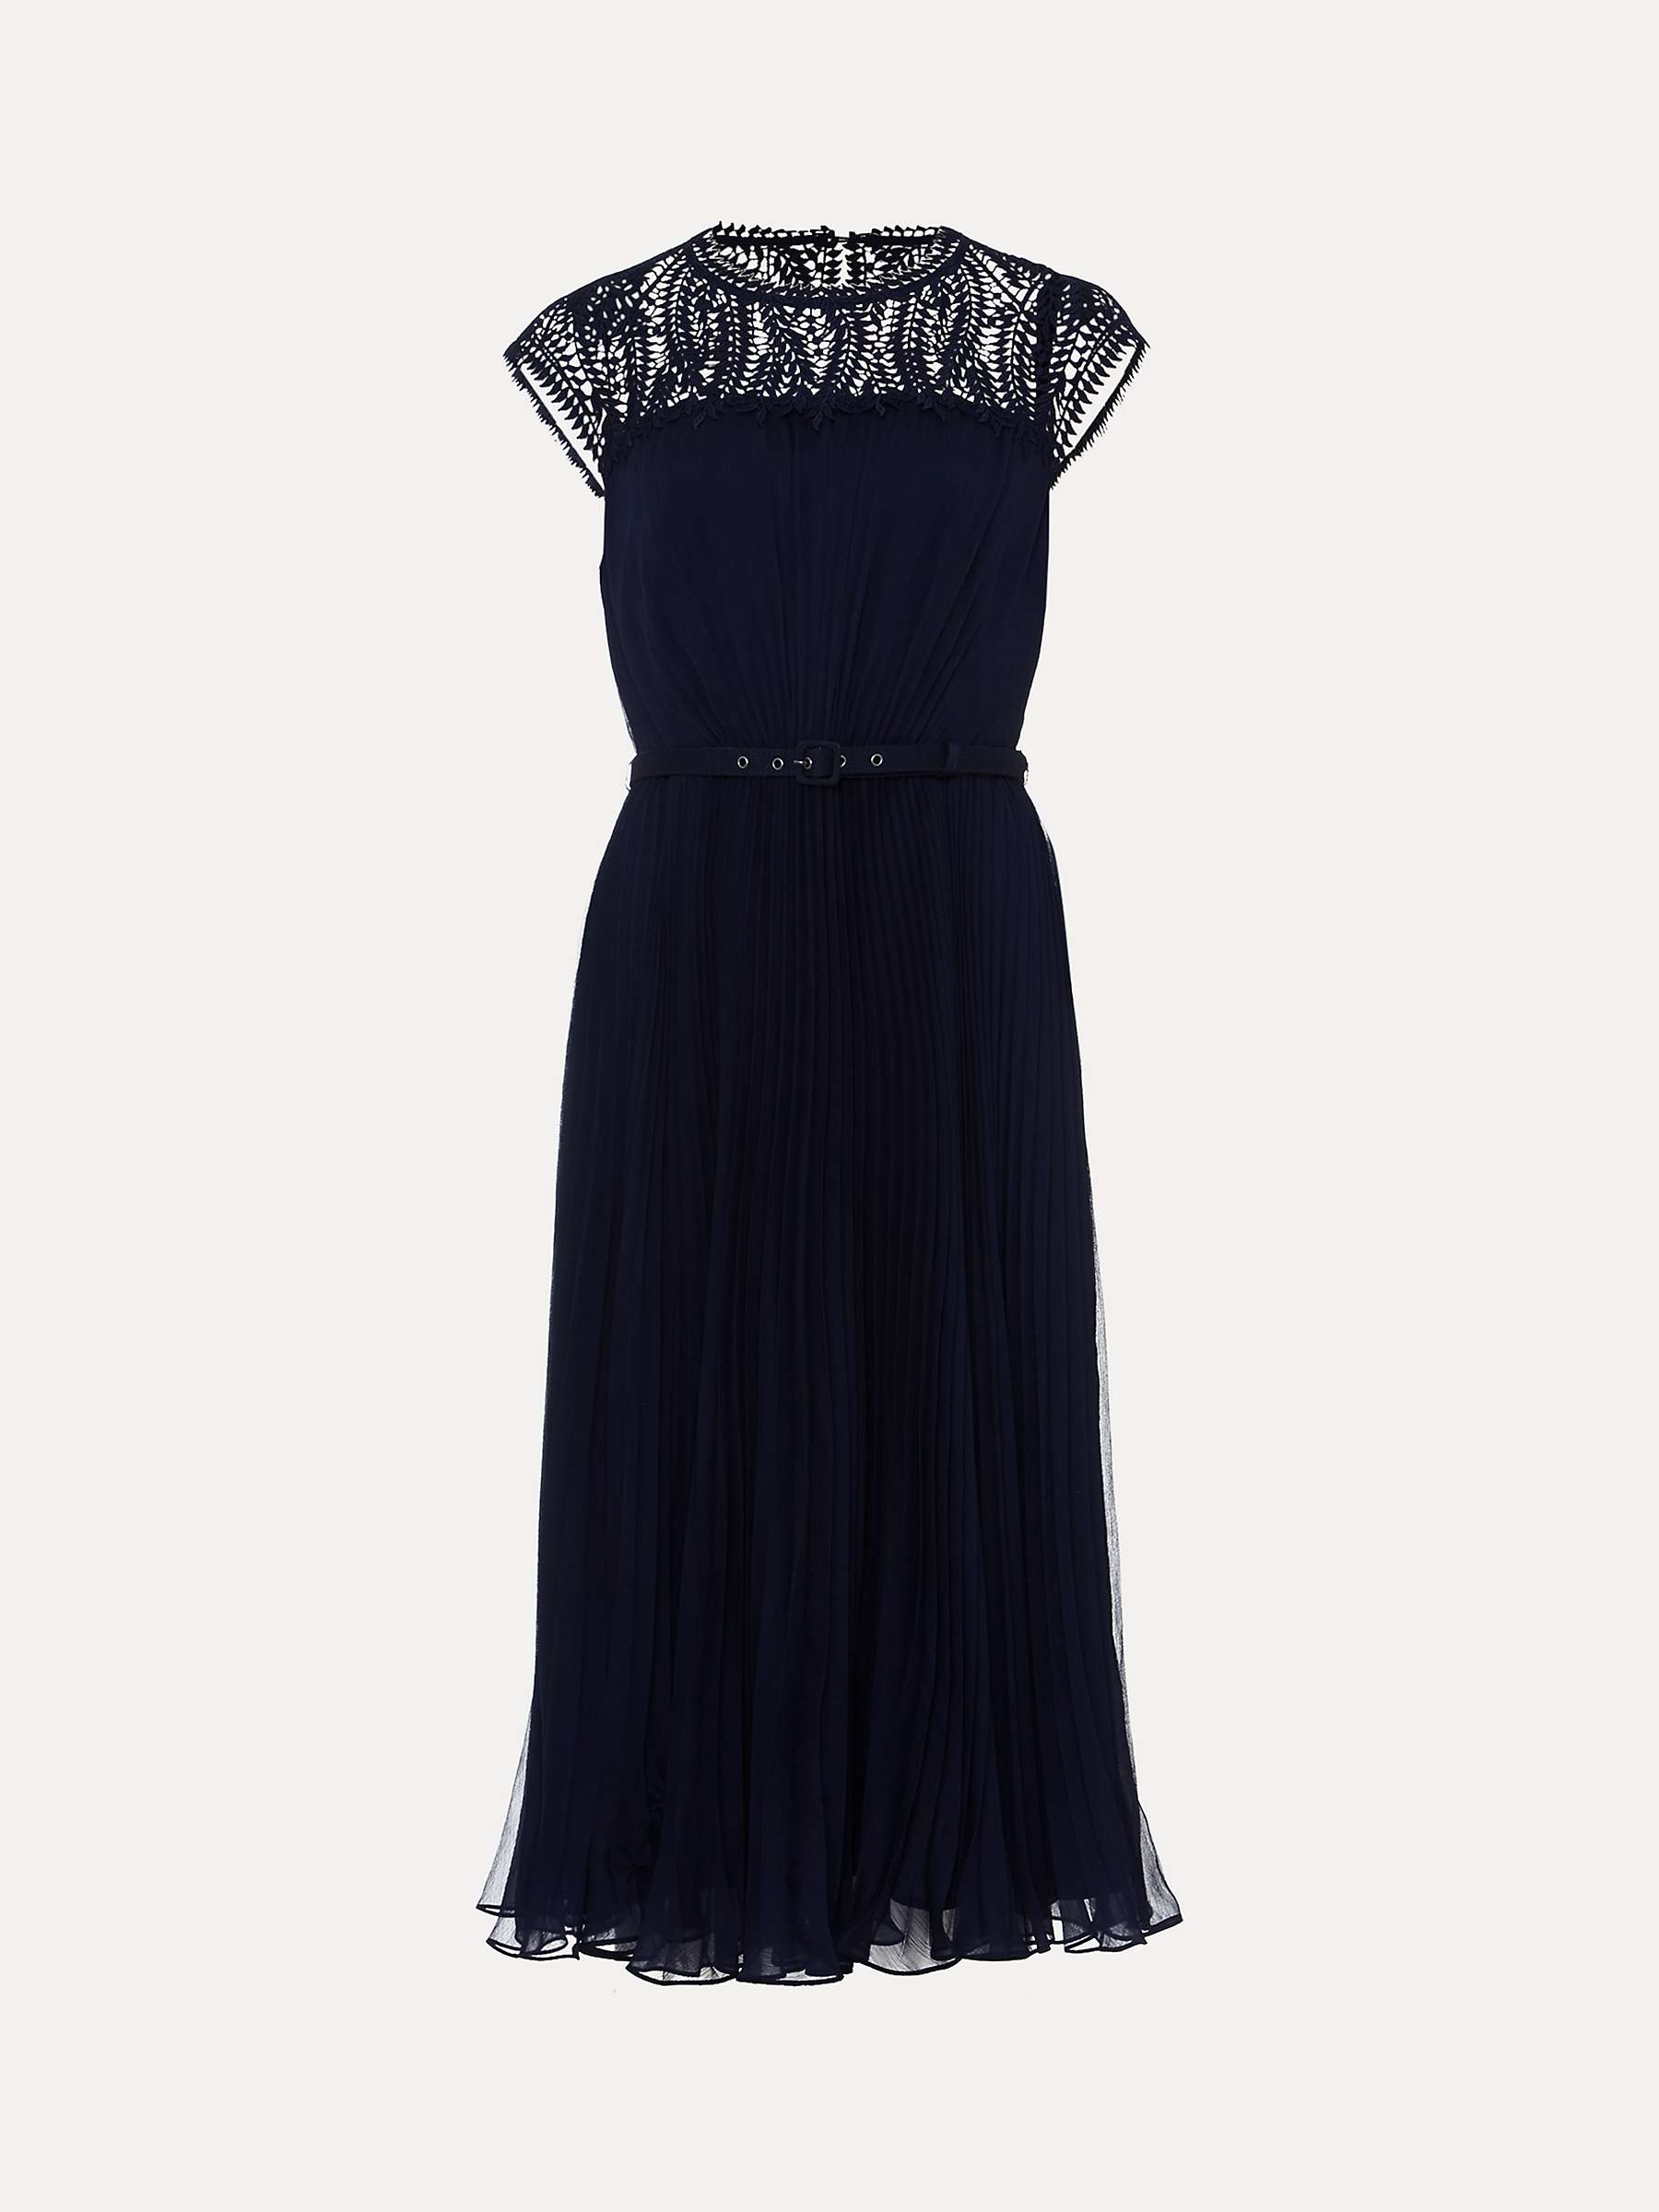 Buy Phase Eight Makaela Pleated Embroidered Dress, Navy Online at johnlewis.com